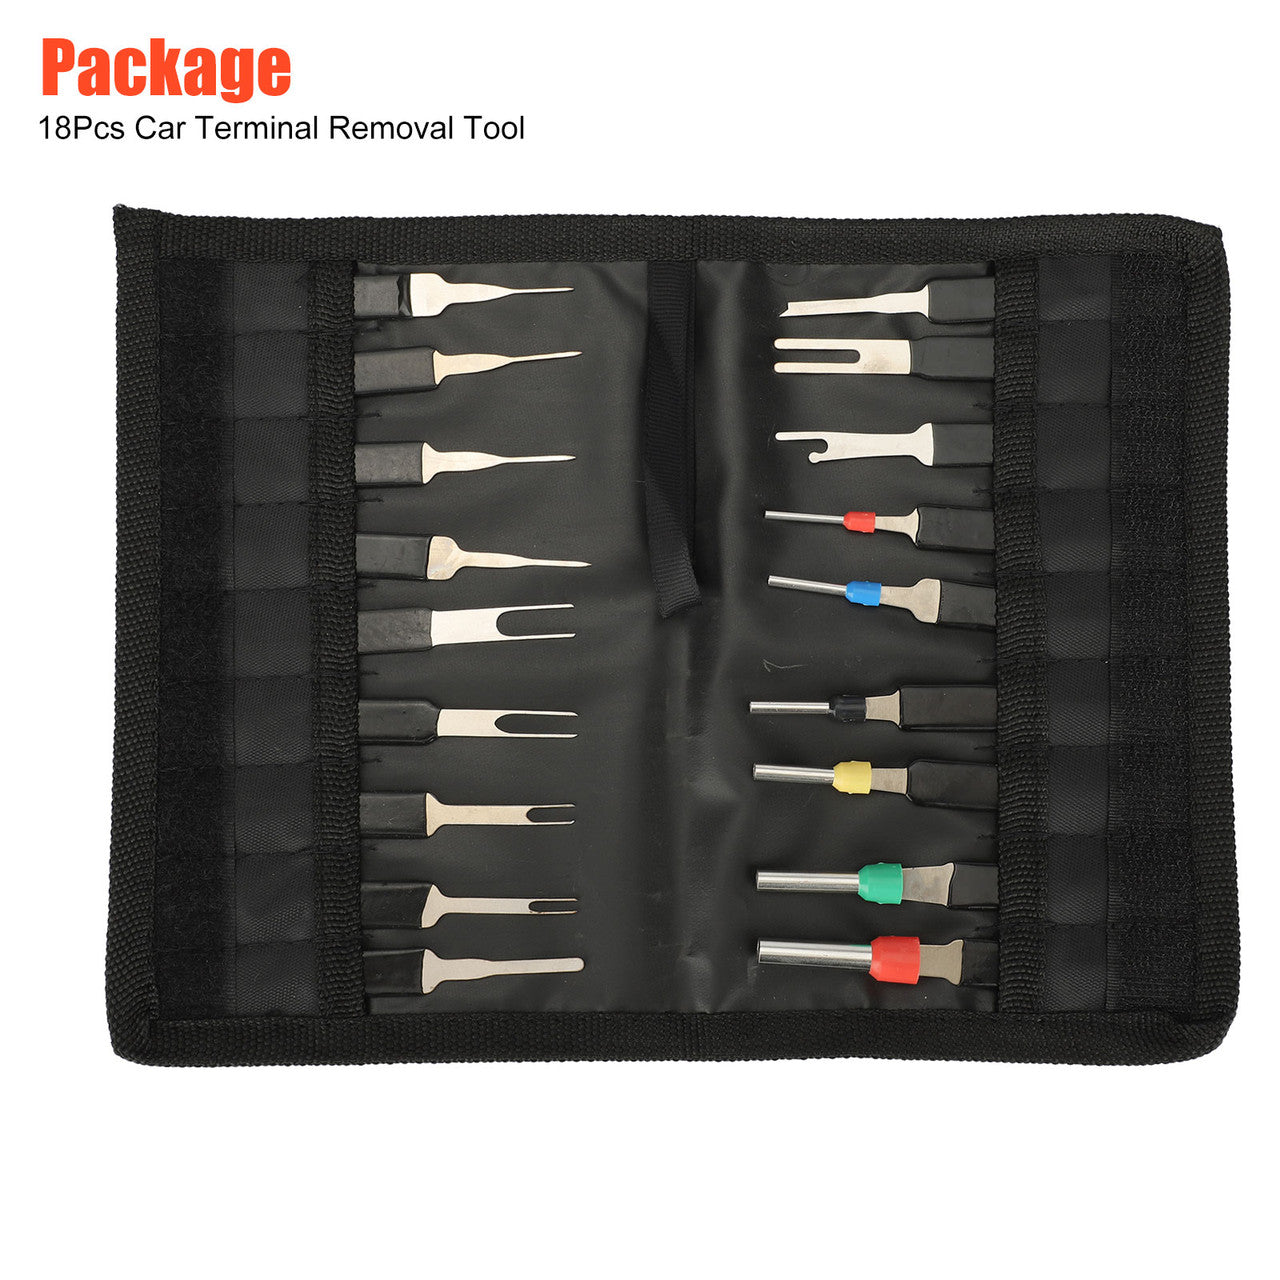 Automotive Electrical Connector Wire Terminal Removal Kit Set for Cars, 18Pc